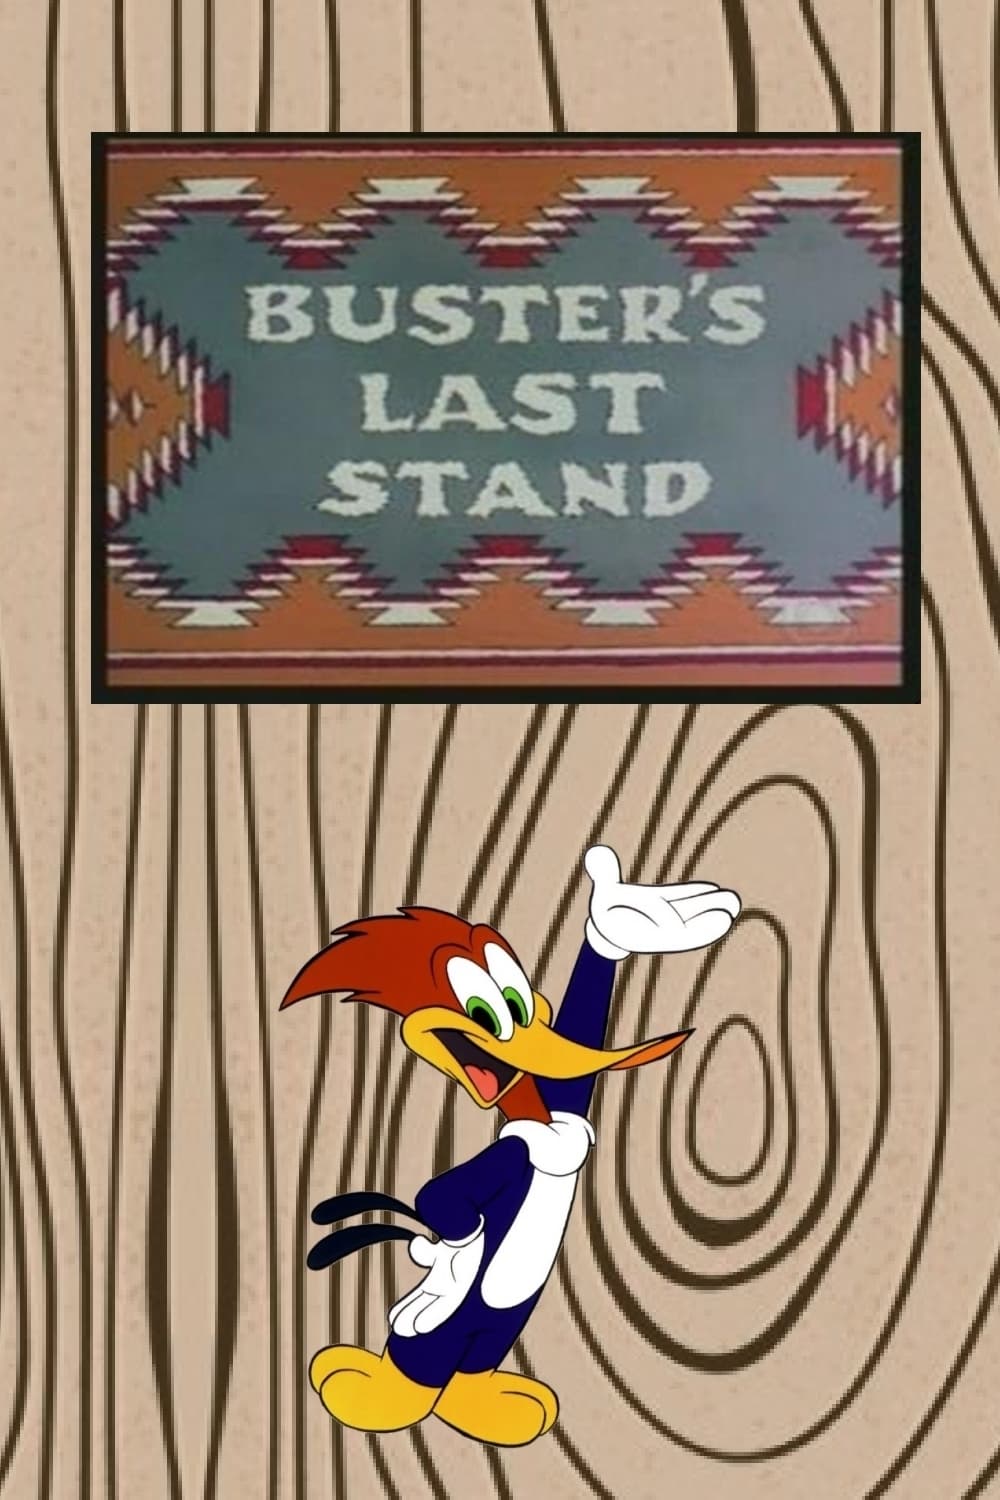 Buster's Last Stand (1970)